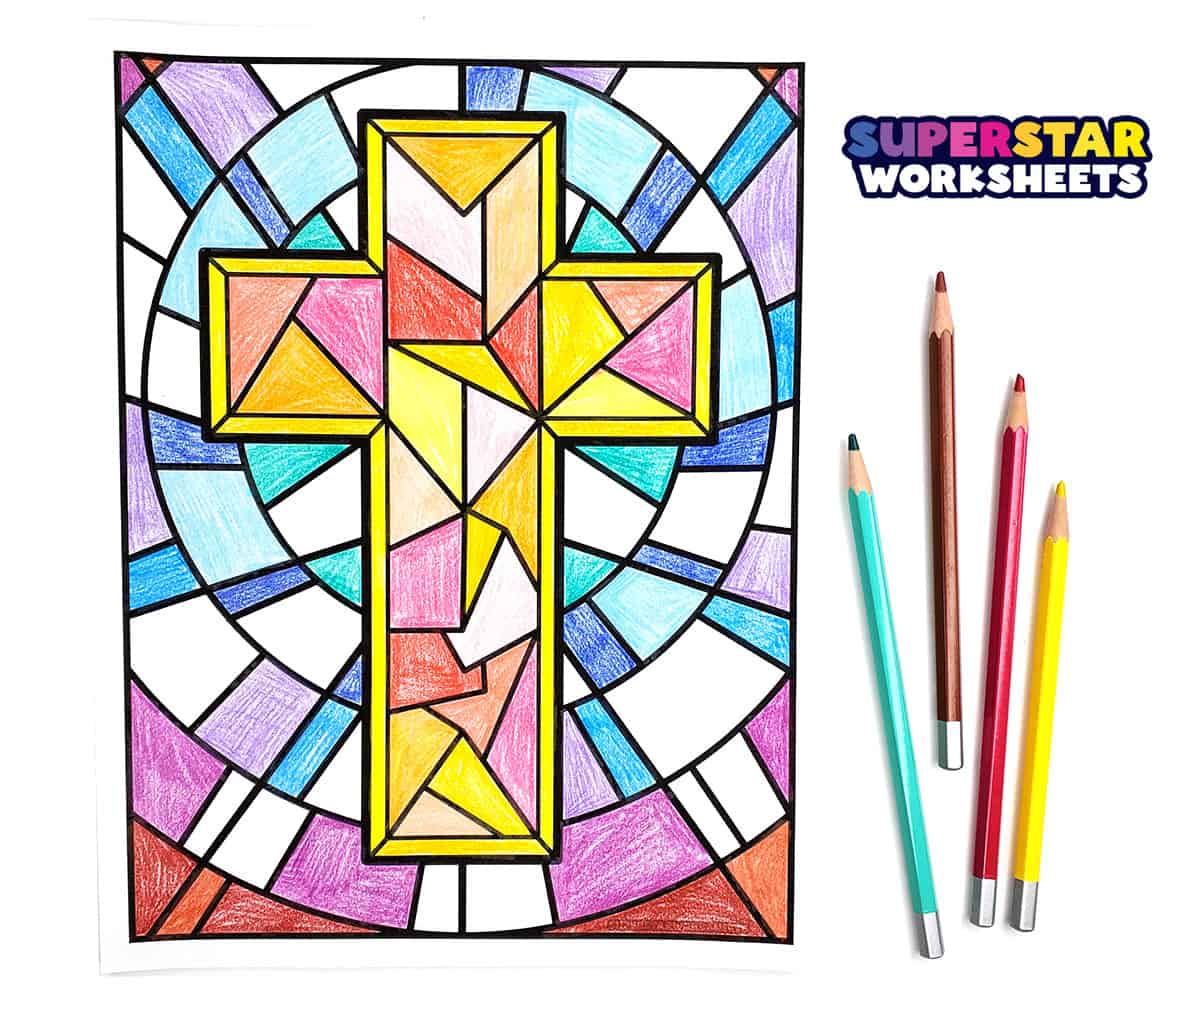 Cross coloring pages